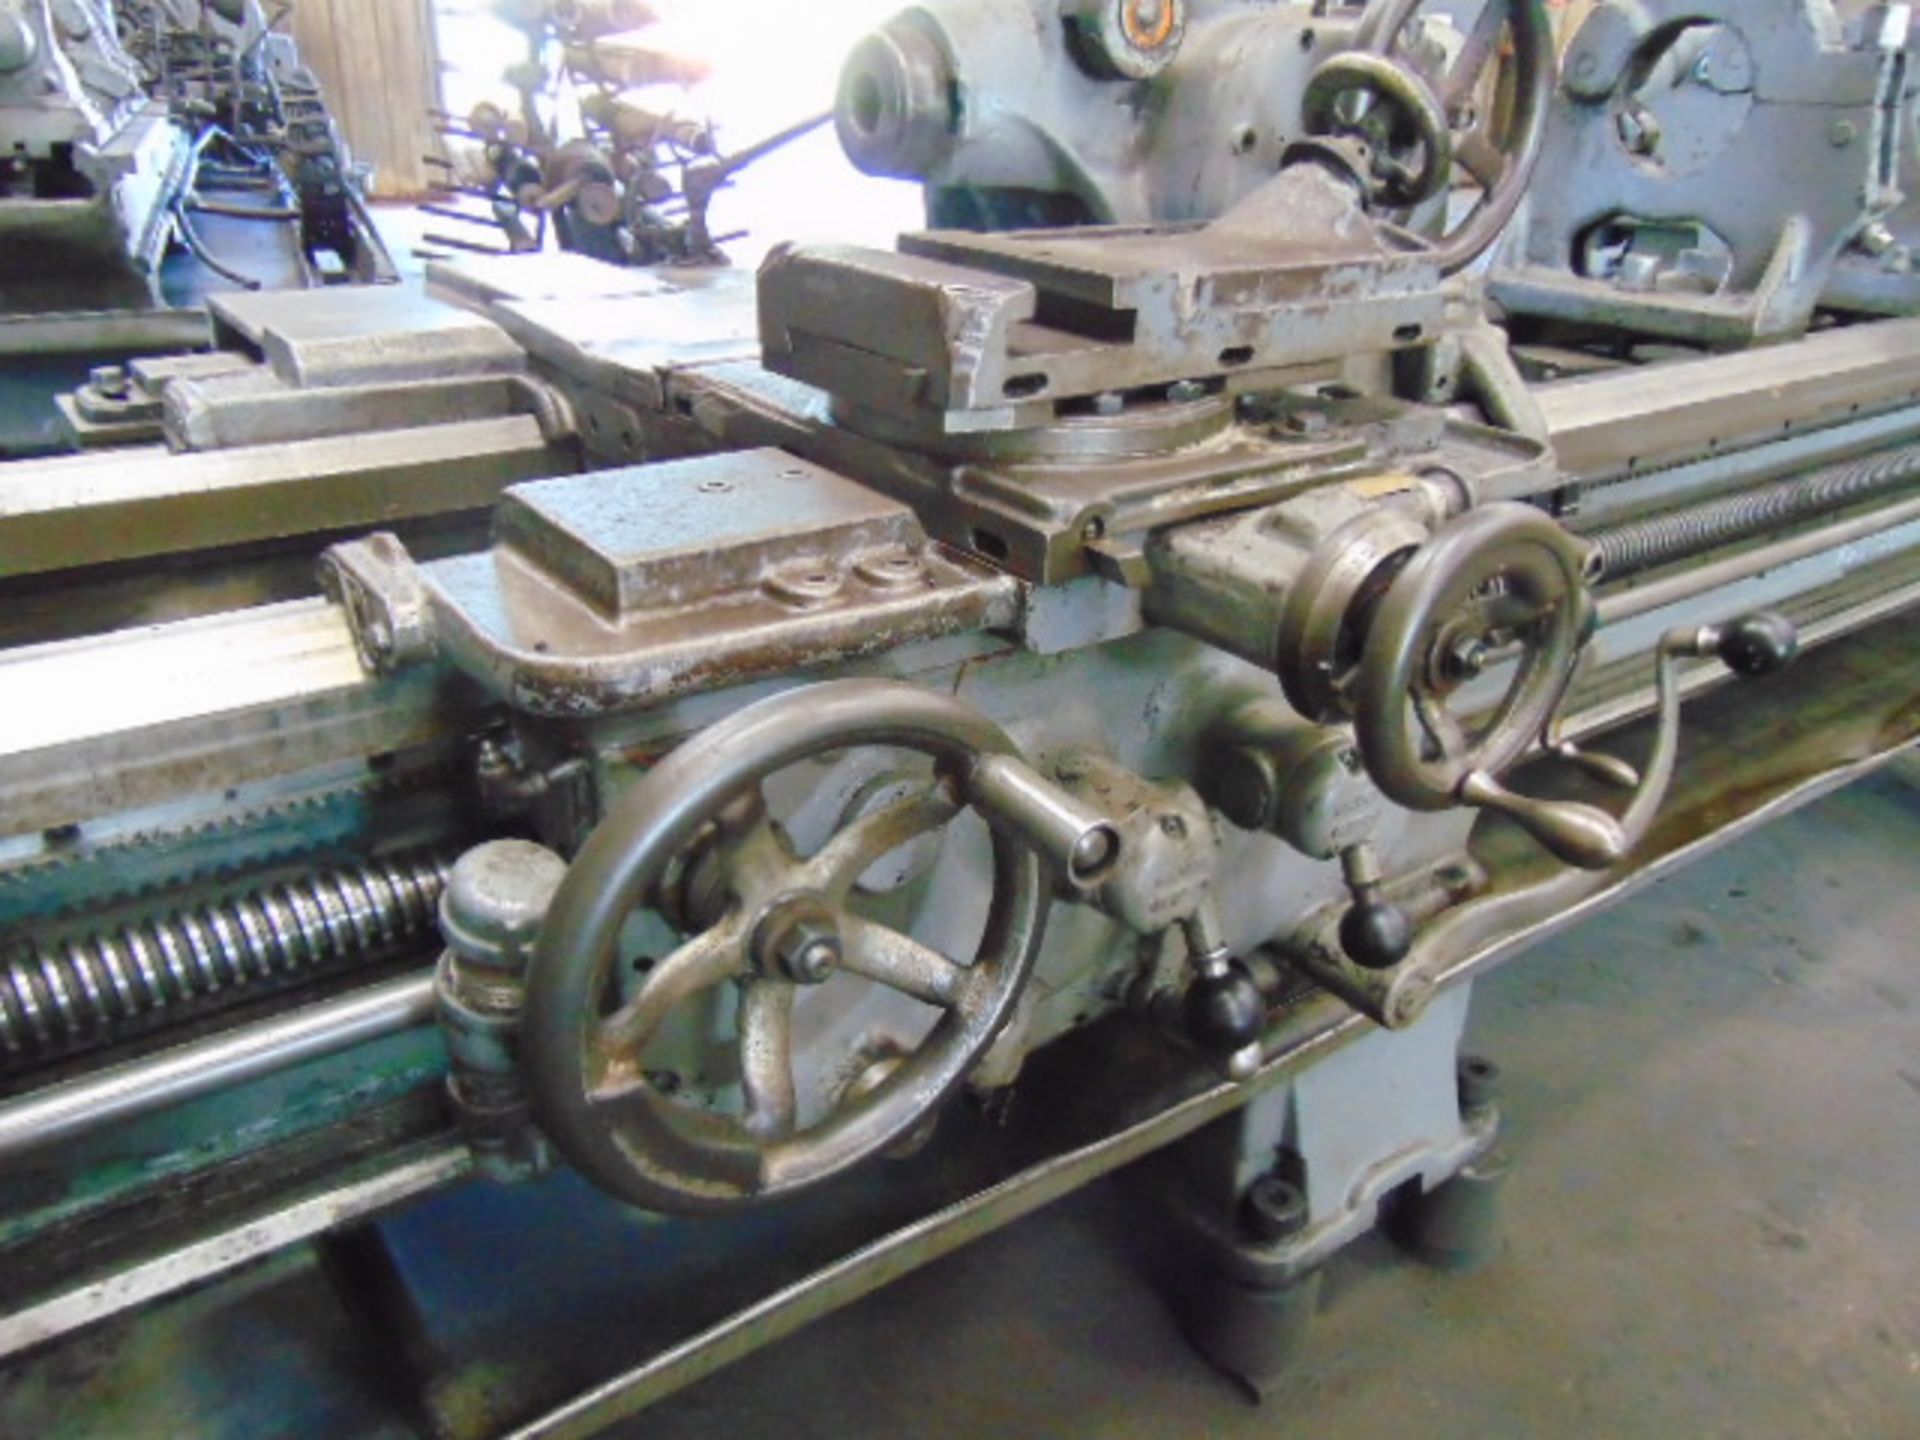 ENGINE LATHE, AXELSON SIZE 2516, 25” max. swing, 120” centers, spdl. spds: 9.5-961 RPM, 2-1/2” spdl. - Image 6 of 10